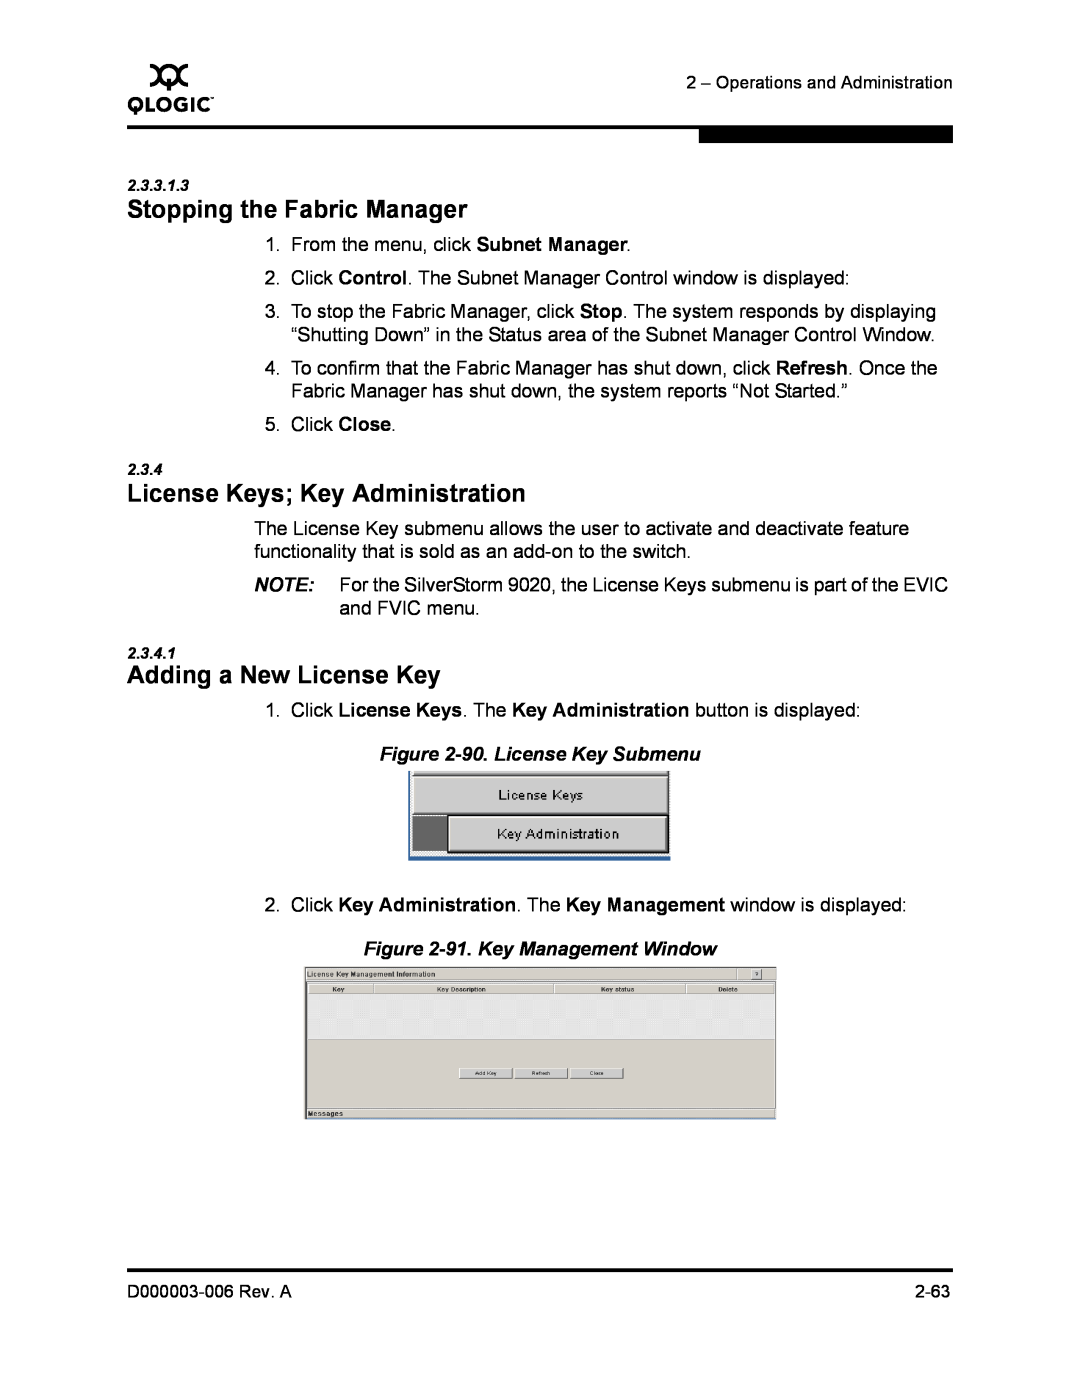 Q-Logic 9000 manual Stopping the Fabric Manager, License Keys Key Administration, Adding a New License Key 